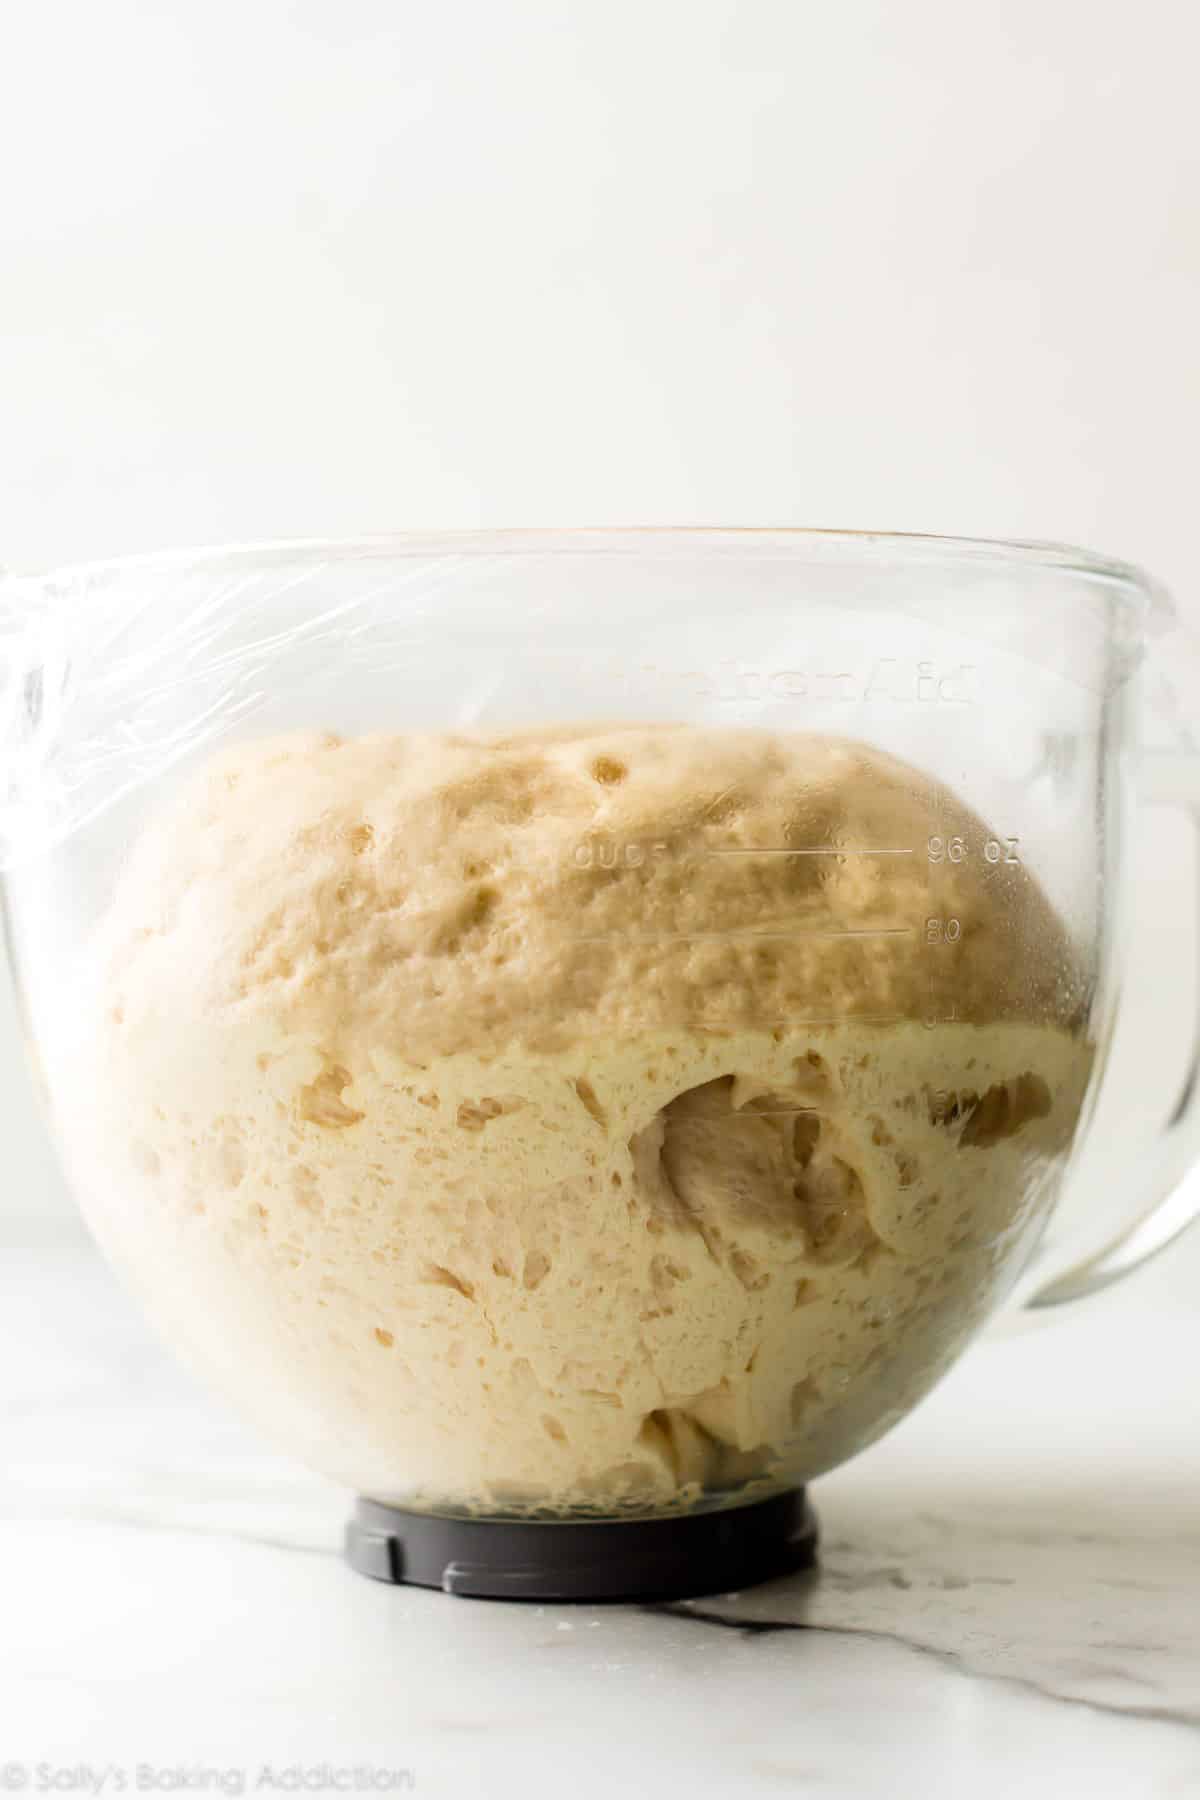 dough that has doubled in size pictured in a glass bowl